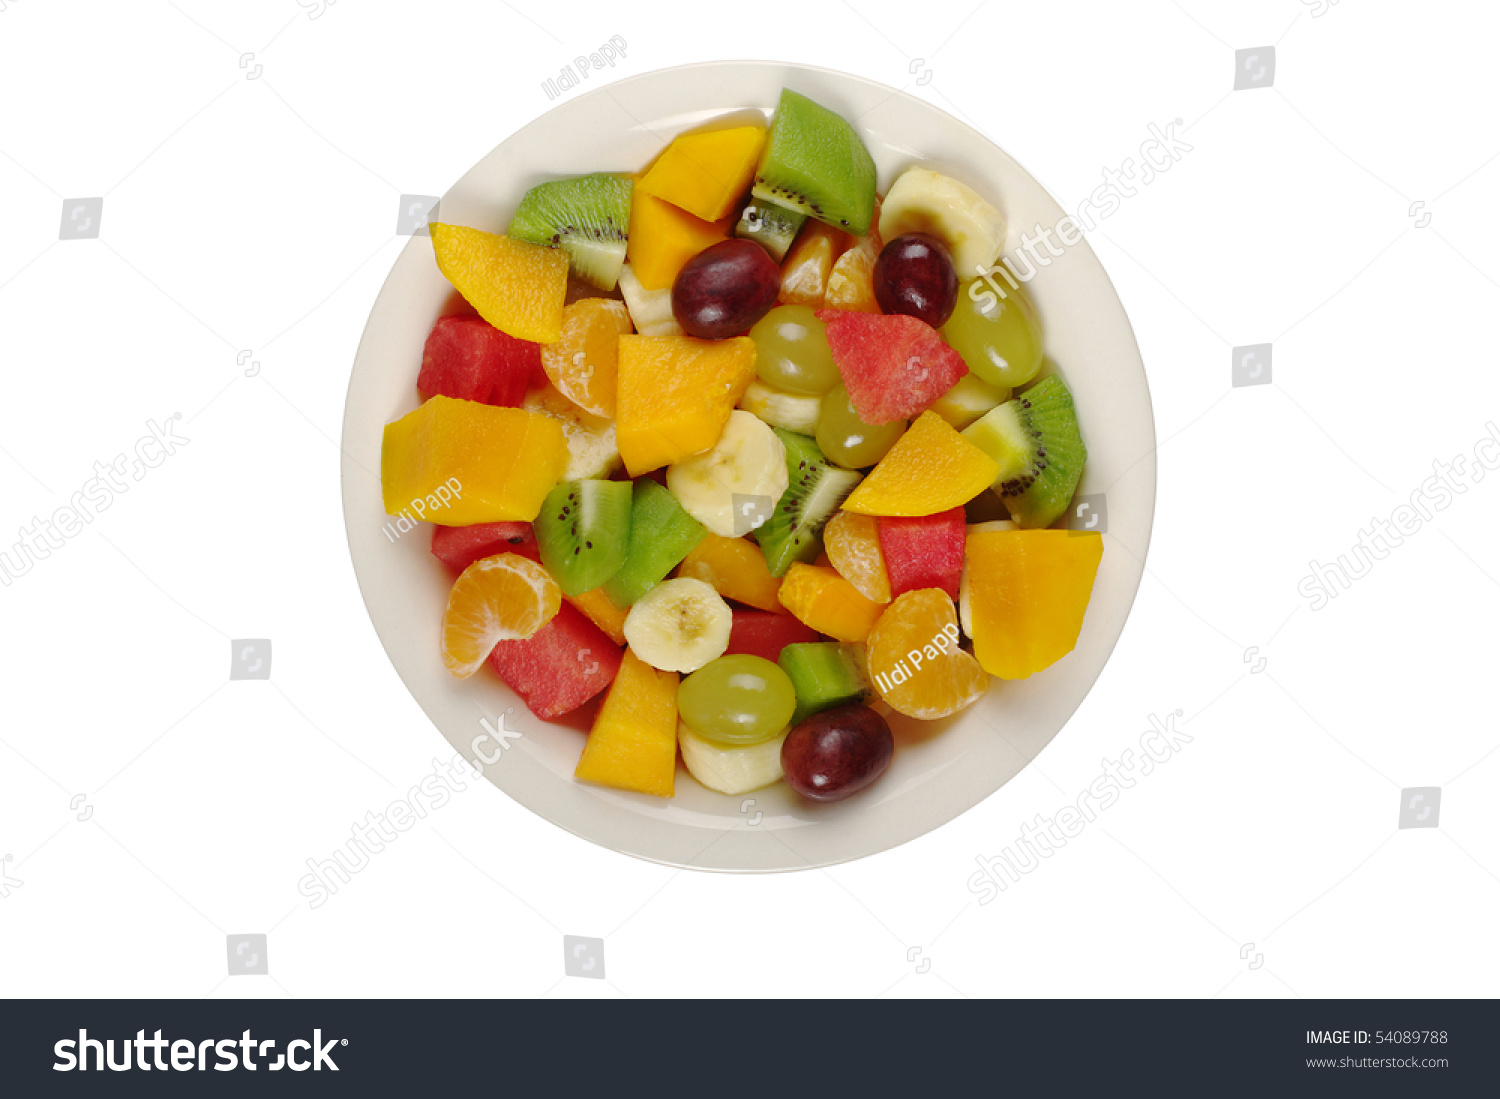 Tropical fruit salad on white plate on white background photographed from above (Isolated) #54089788